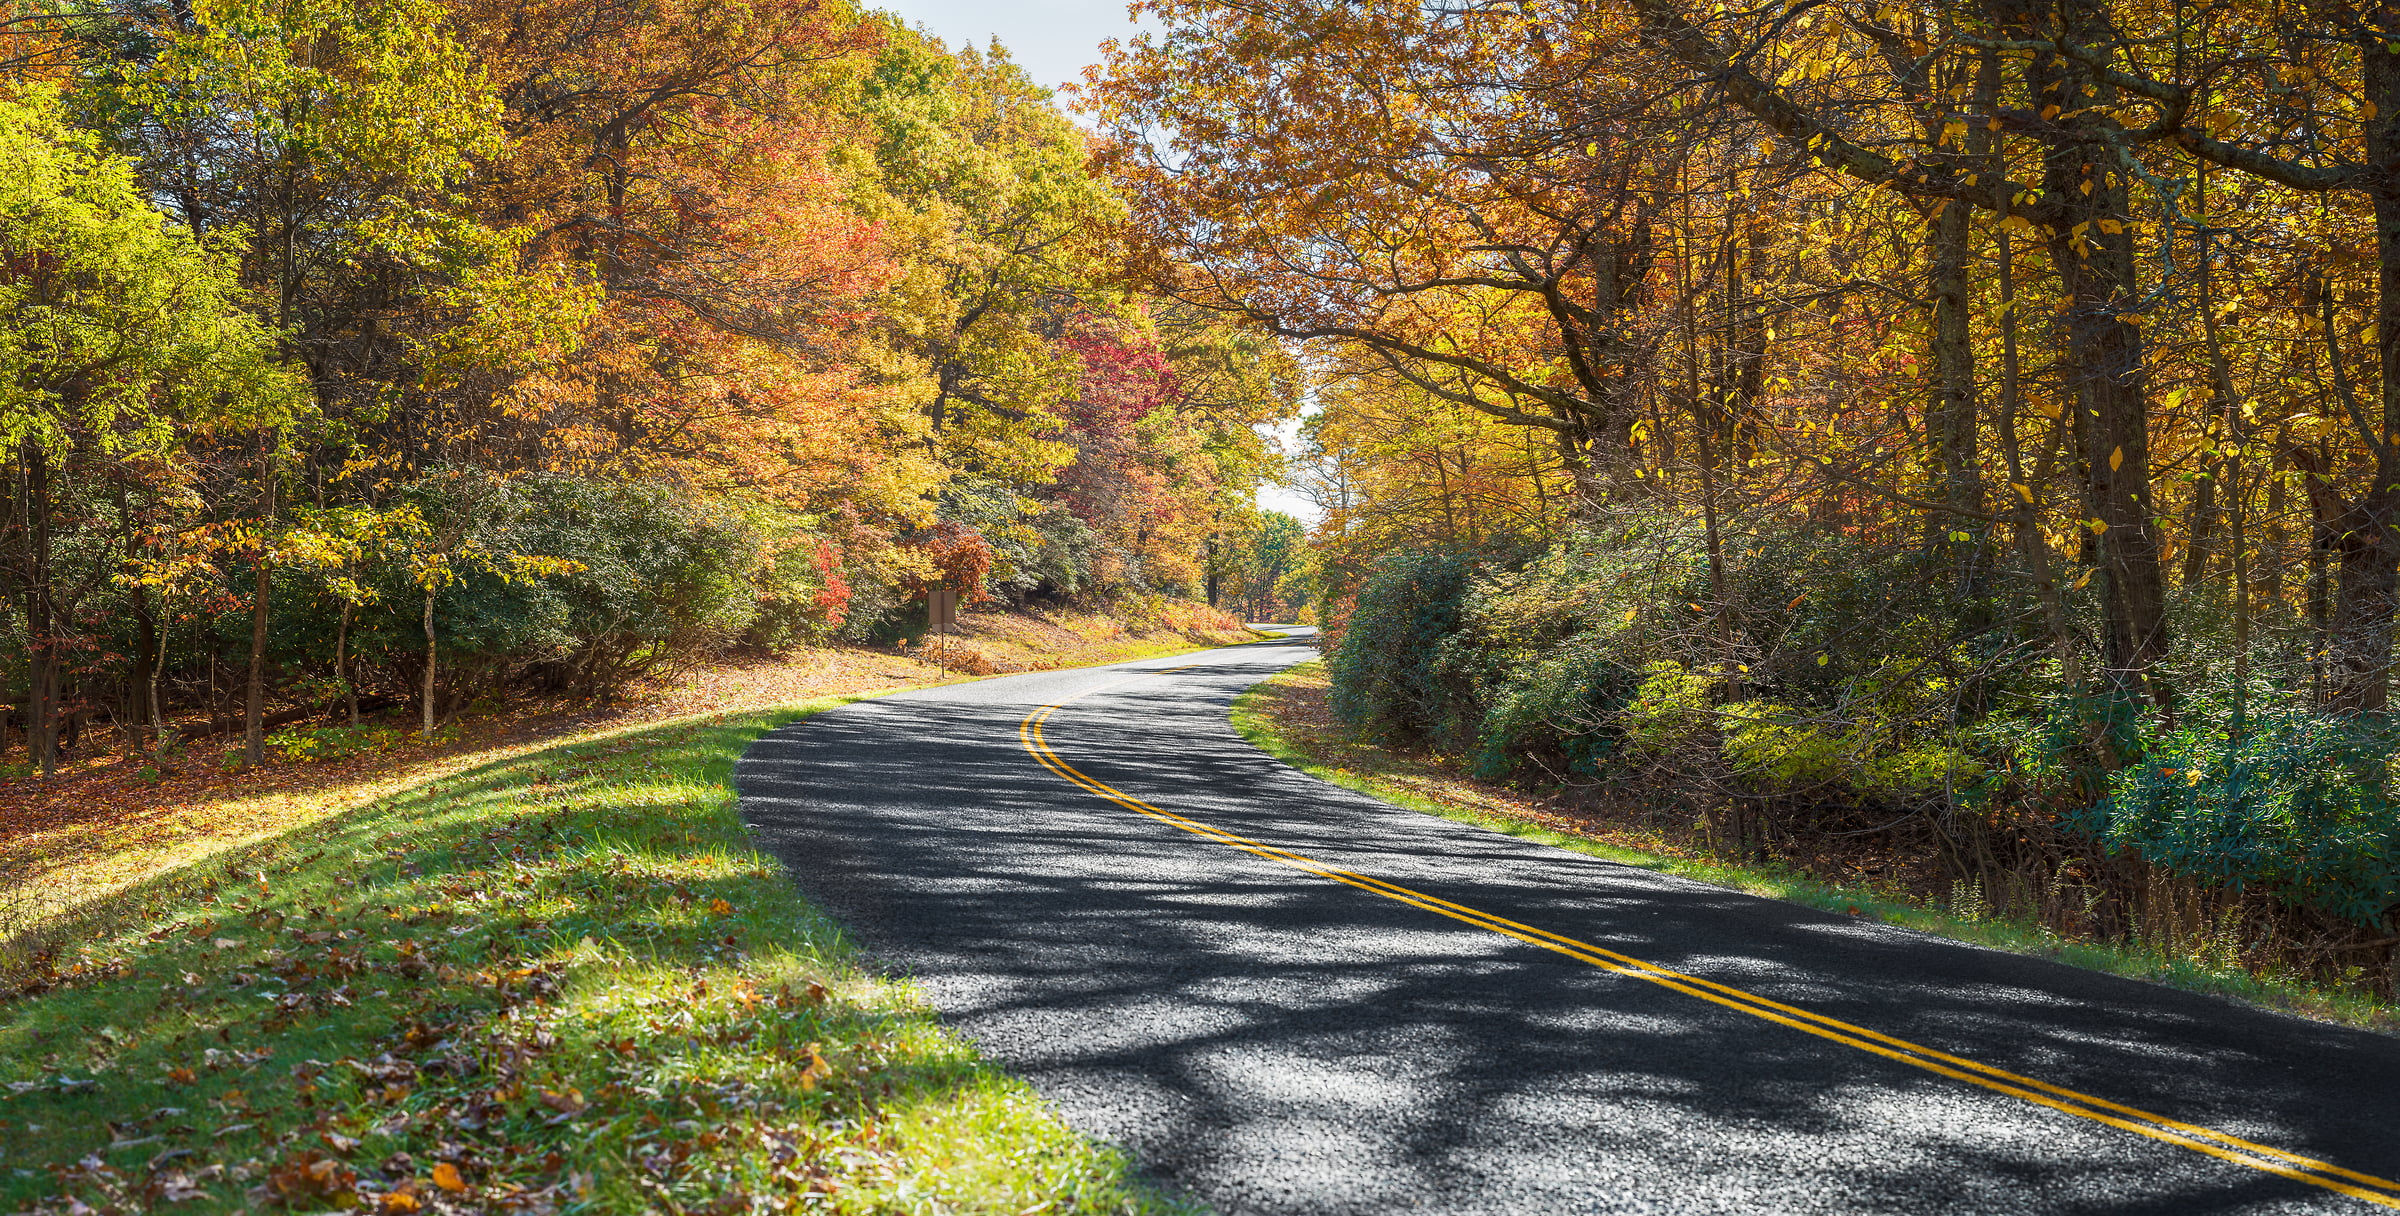 303 megapixels! A very high resolution, large-format VAST photo of a road curving through a forest in autumn with colorful fall autumn foliage; fine art photograph created by Jim Tarpo at Milepost 160, Blue Ridge Pkwy, Virginia.